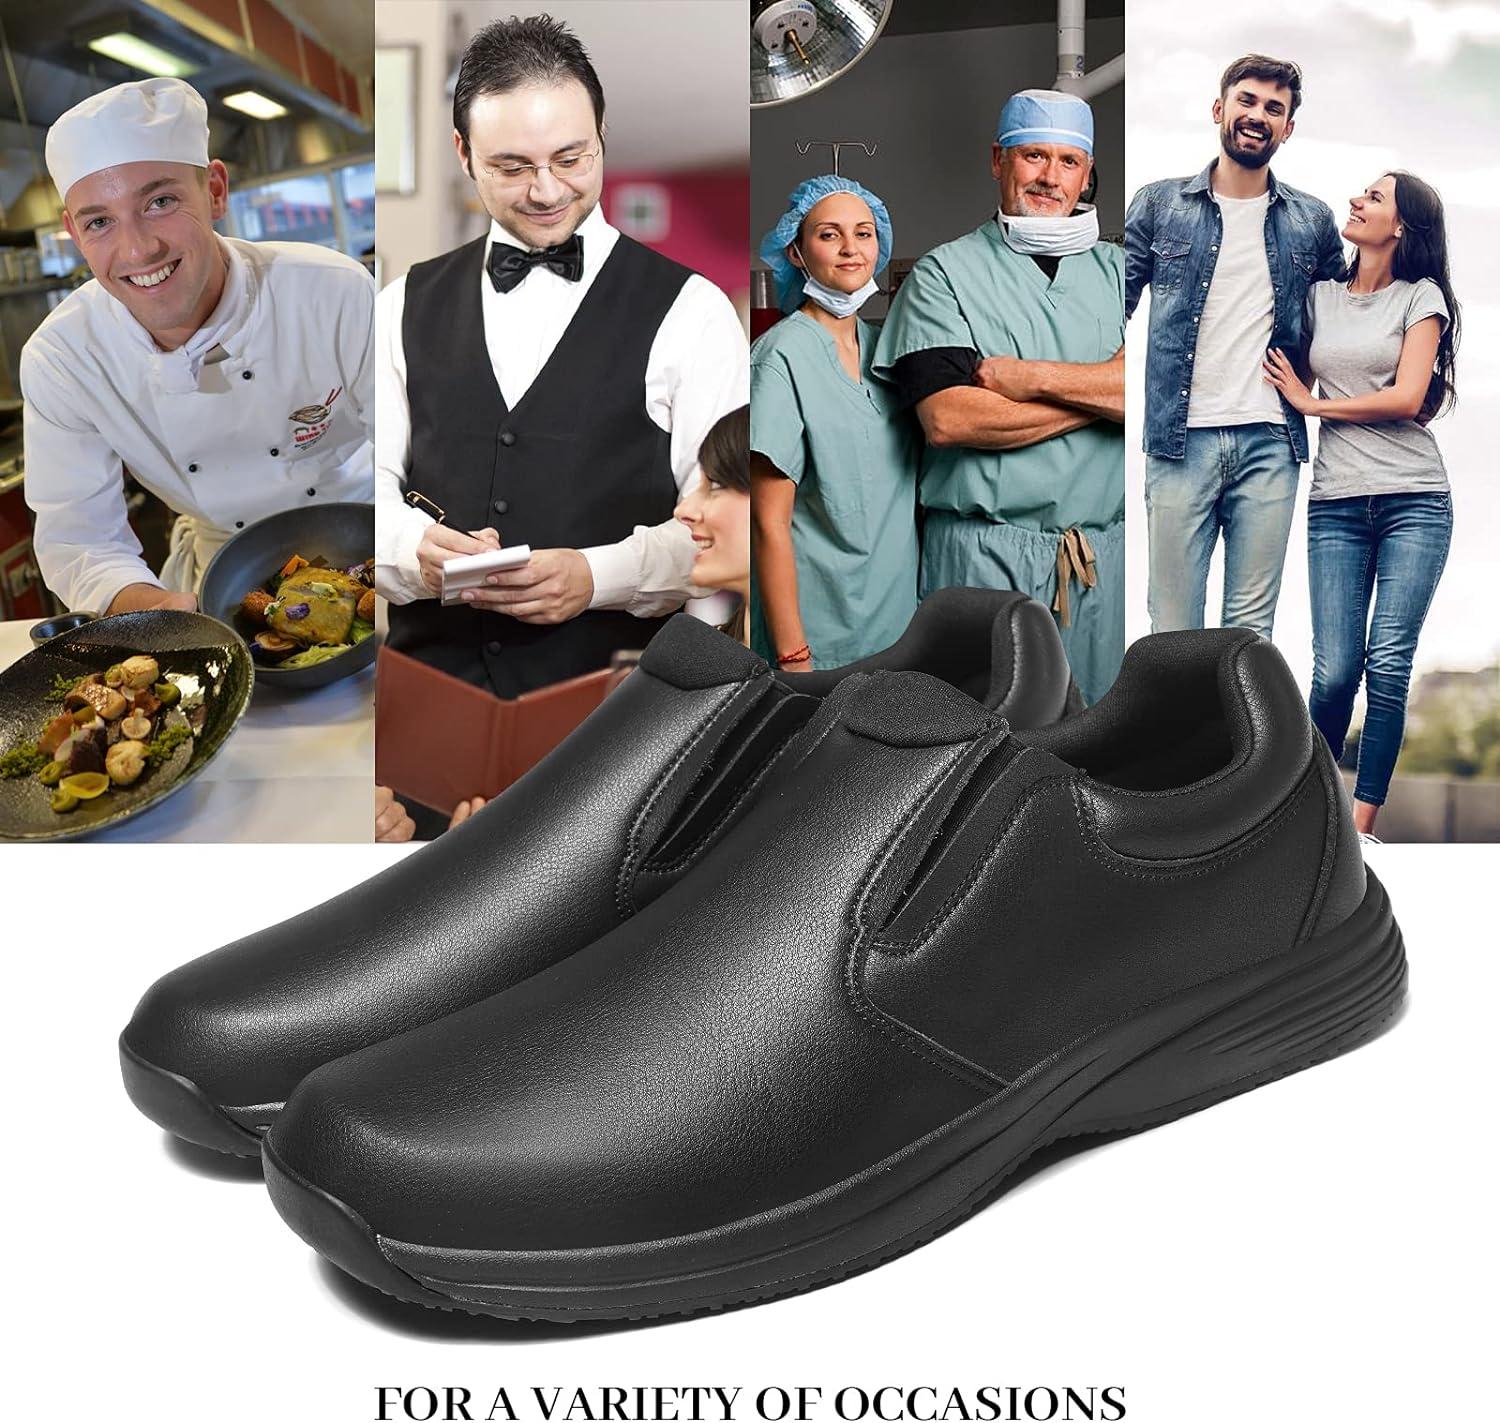 FASTARDM Mens Non-Slip Professional Chef Shoes and Oil Water